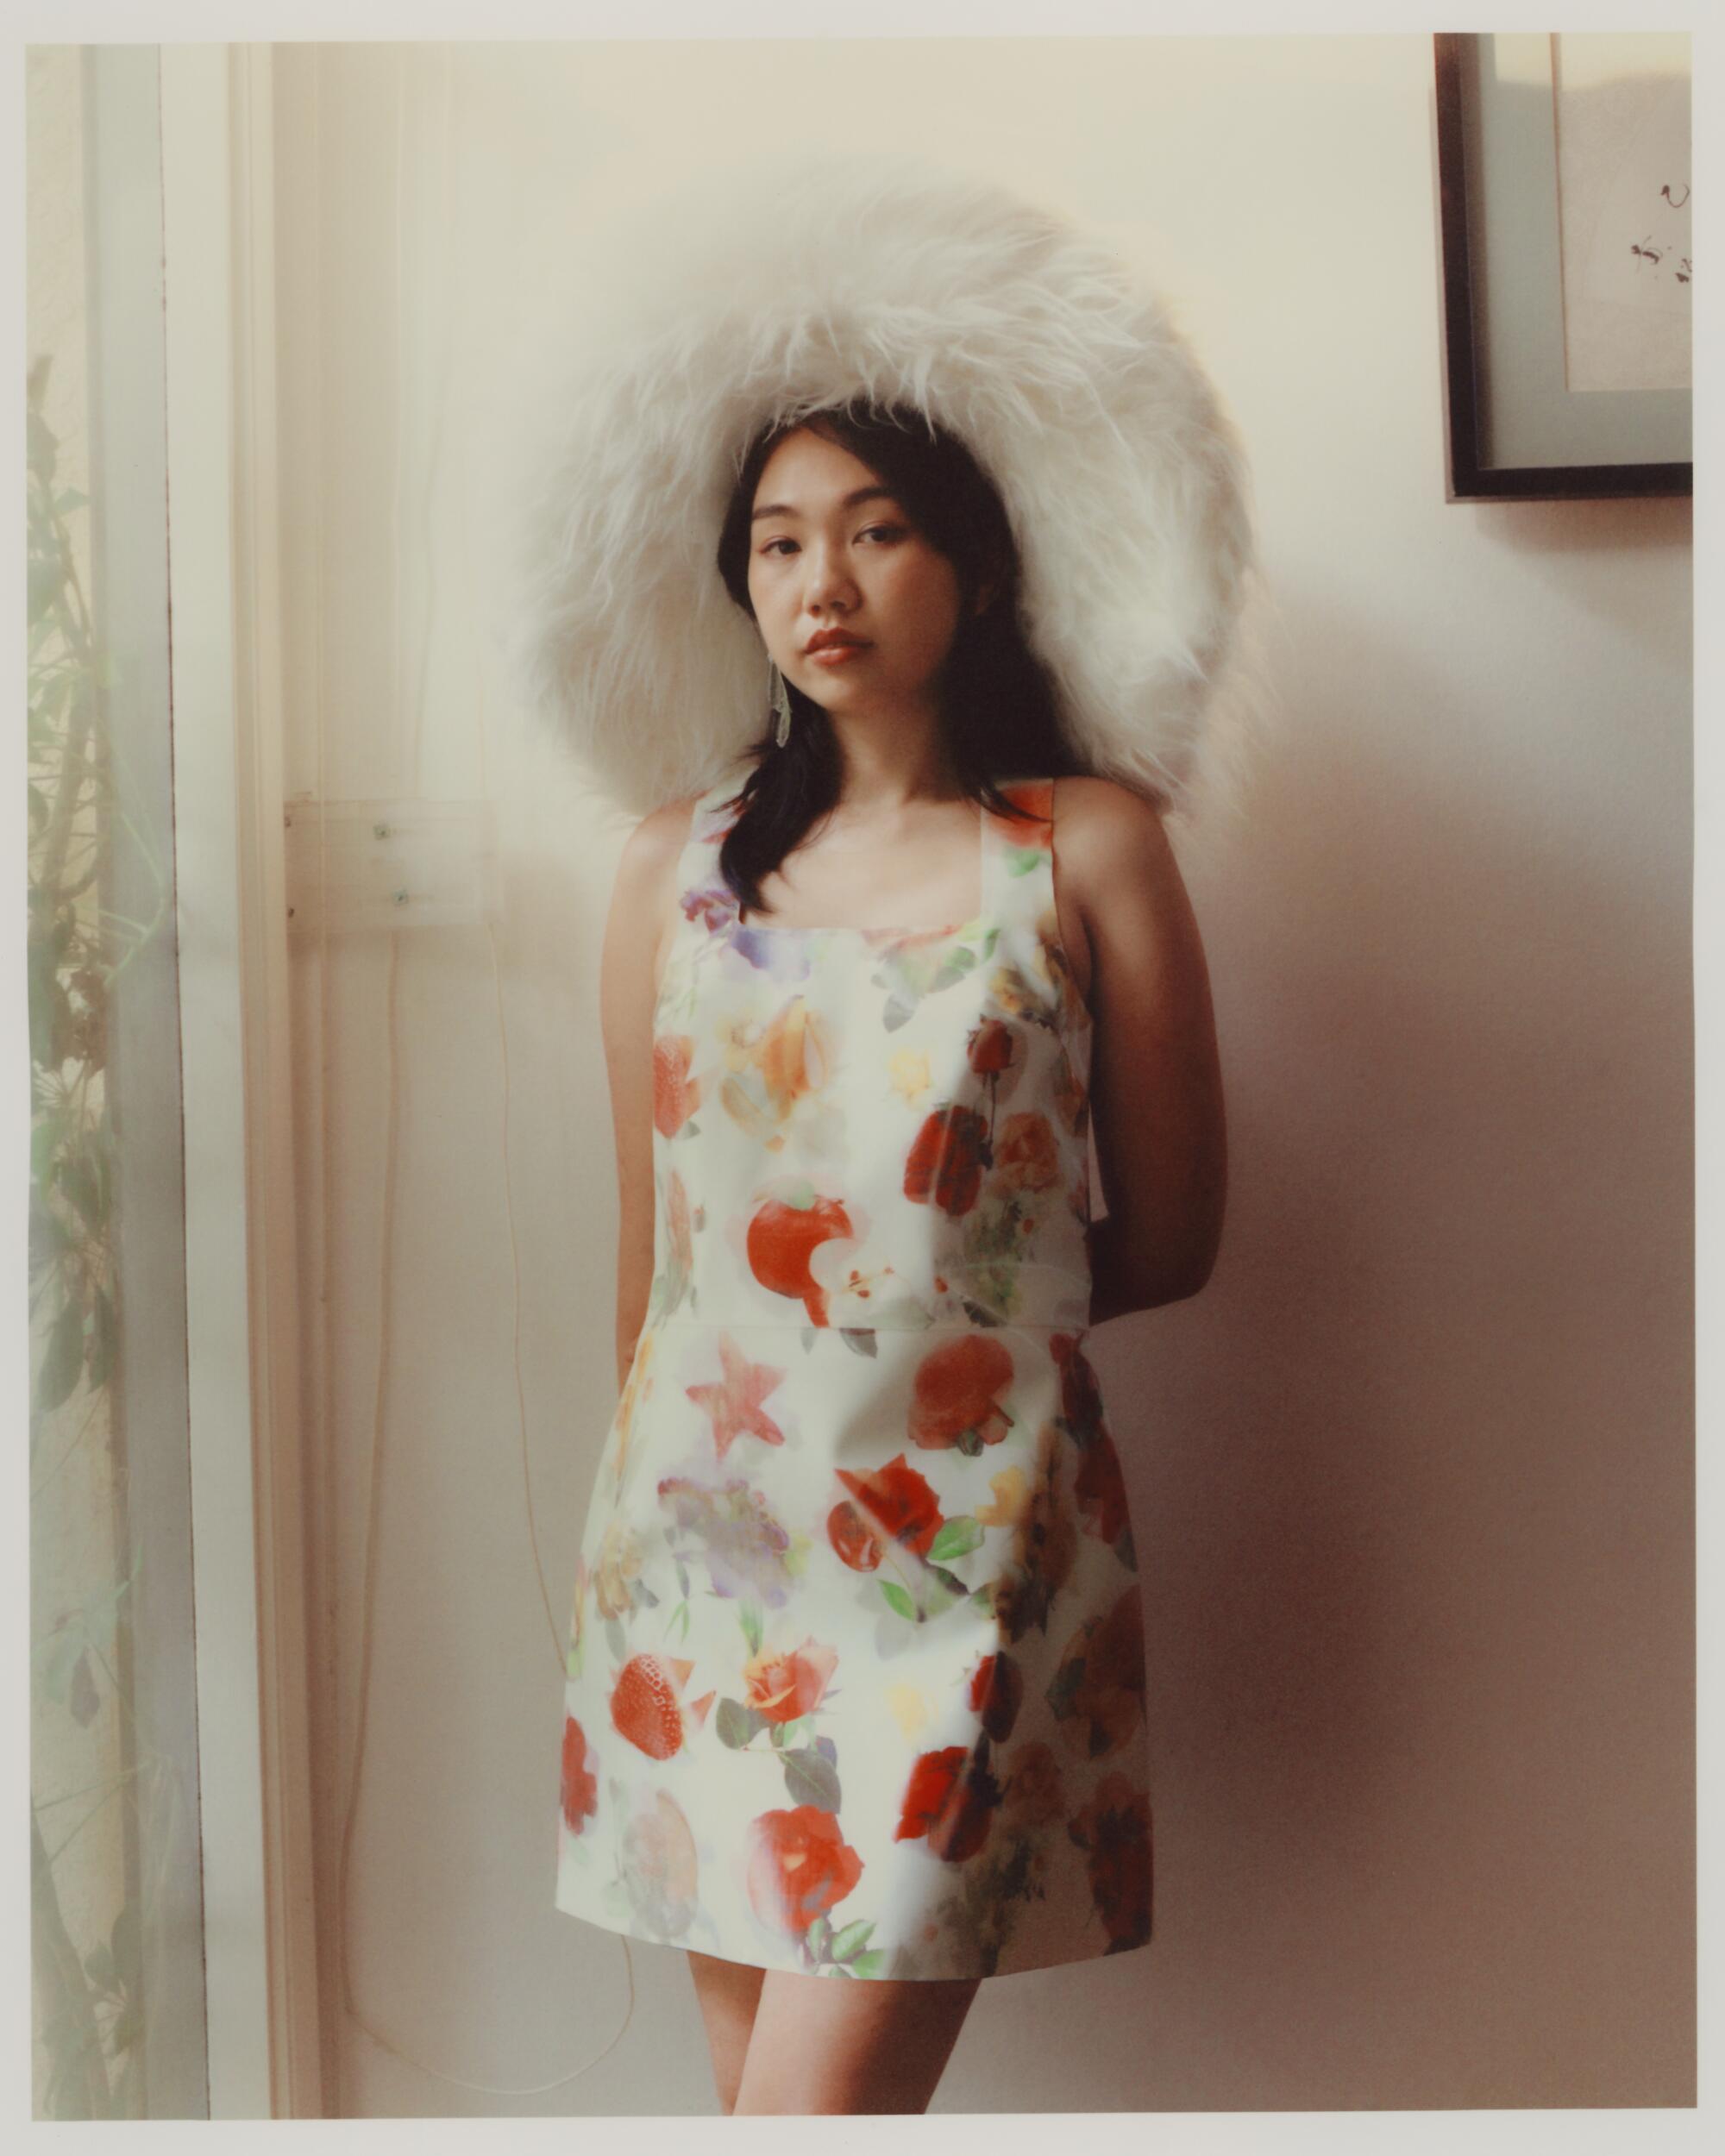 A woman stands against a light-colored wall wearing a big fluffy hat and a shift dress printed with fruits.